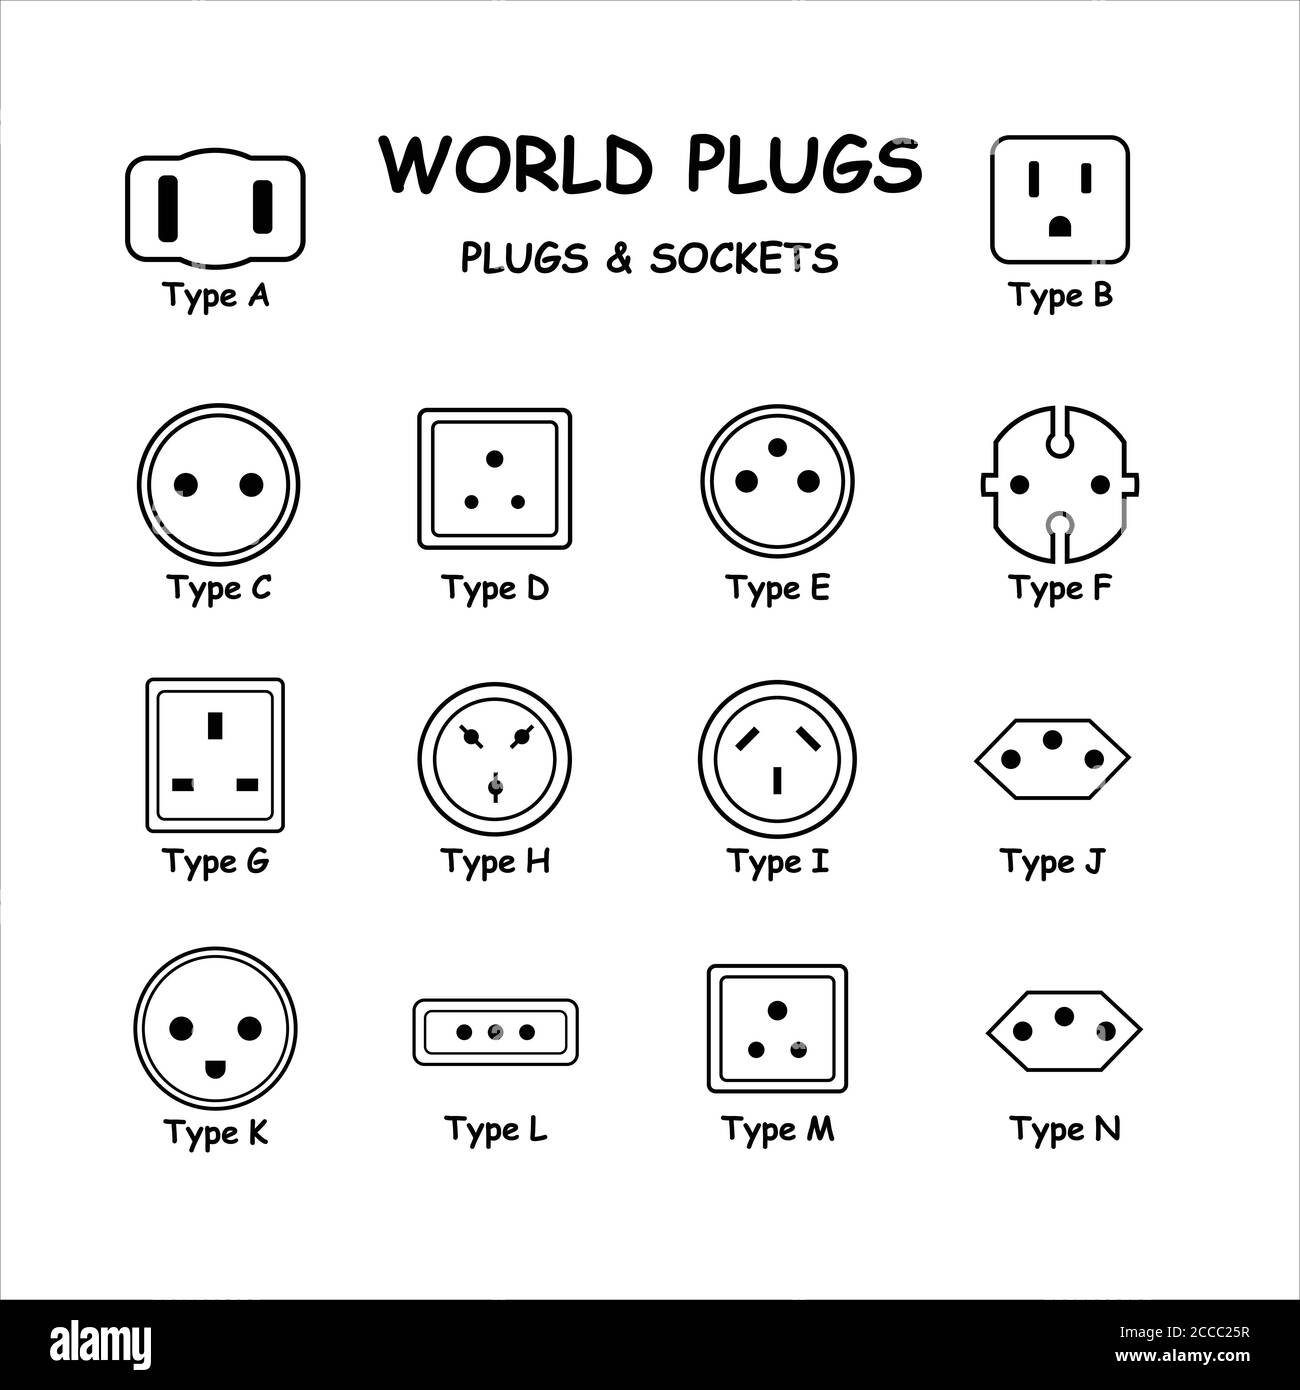 International World Plugs and Sockets Types Diagram Set. Vector Diagram Depicting Electric Plugs and Sockets from Various Countries Stock Vector